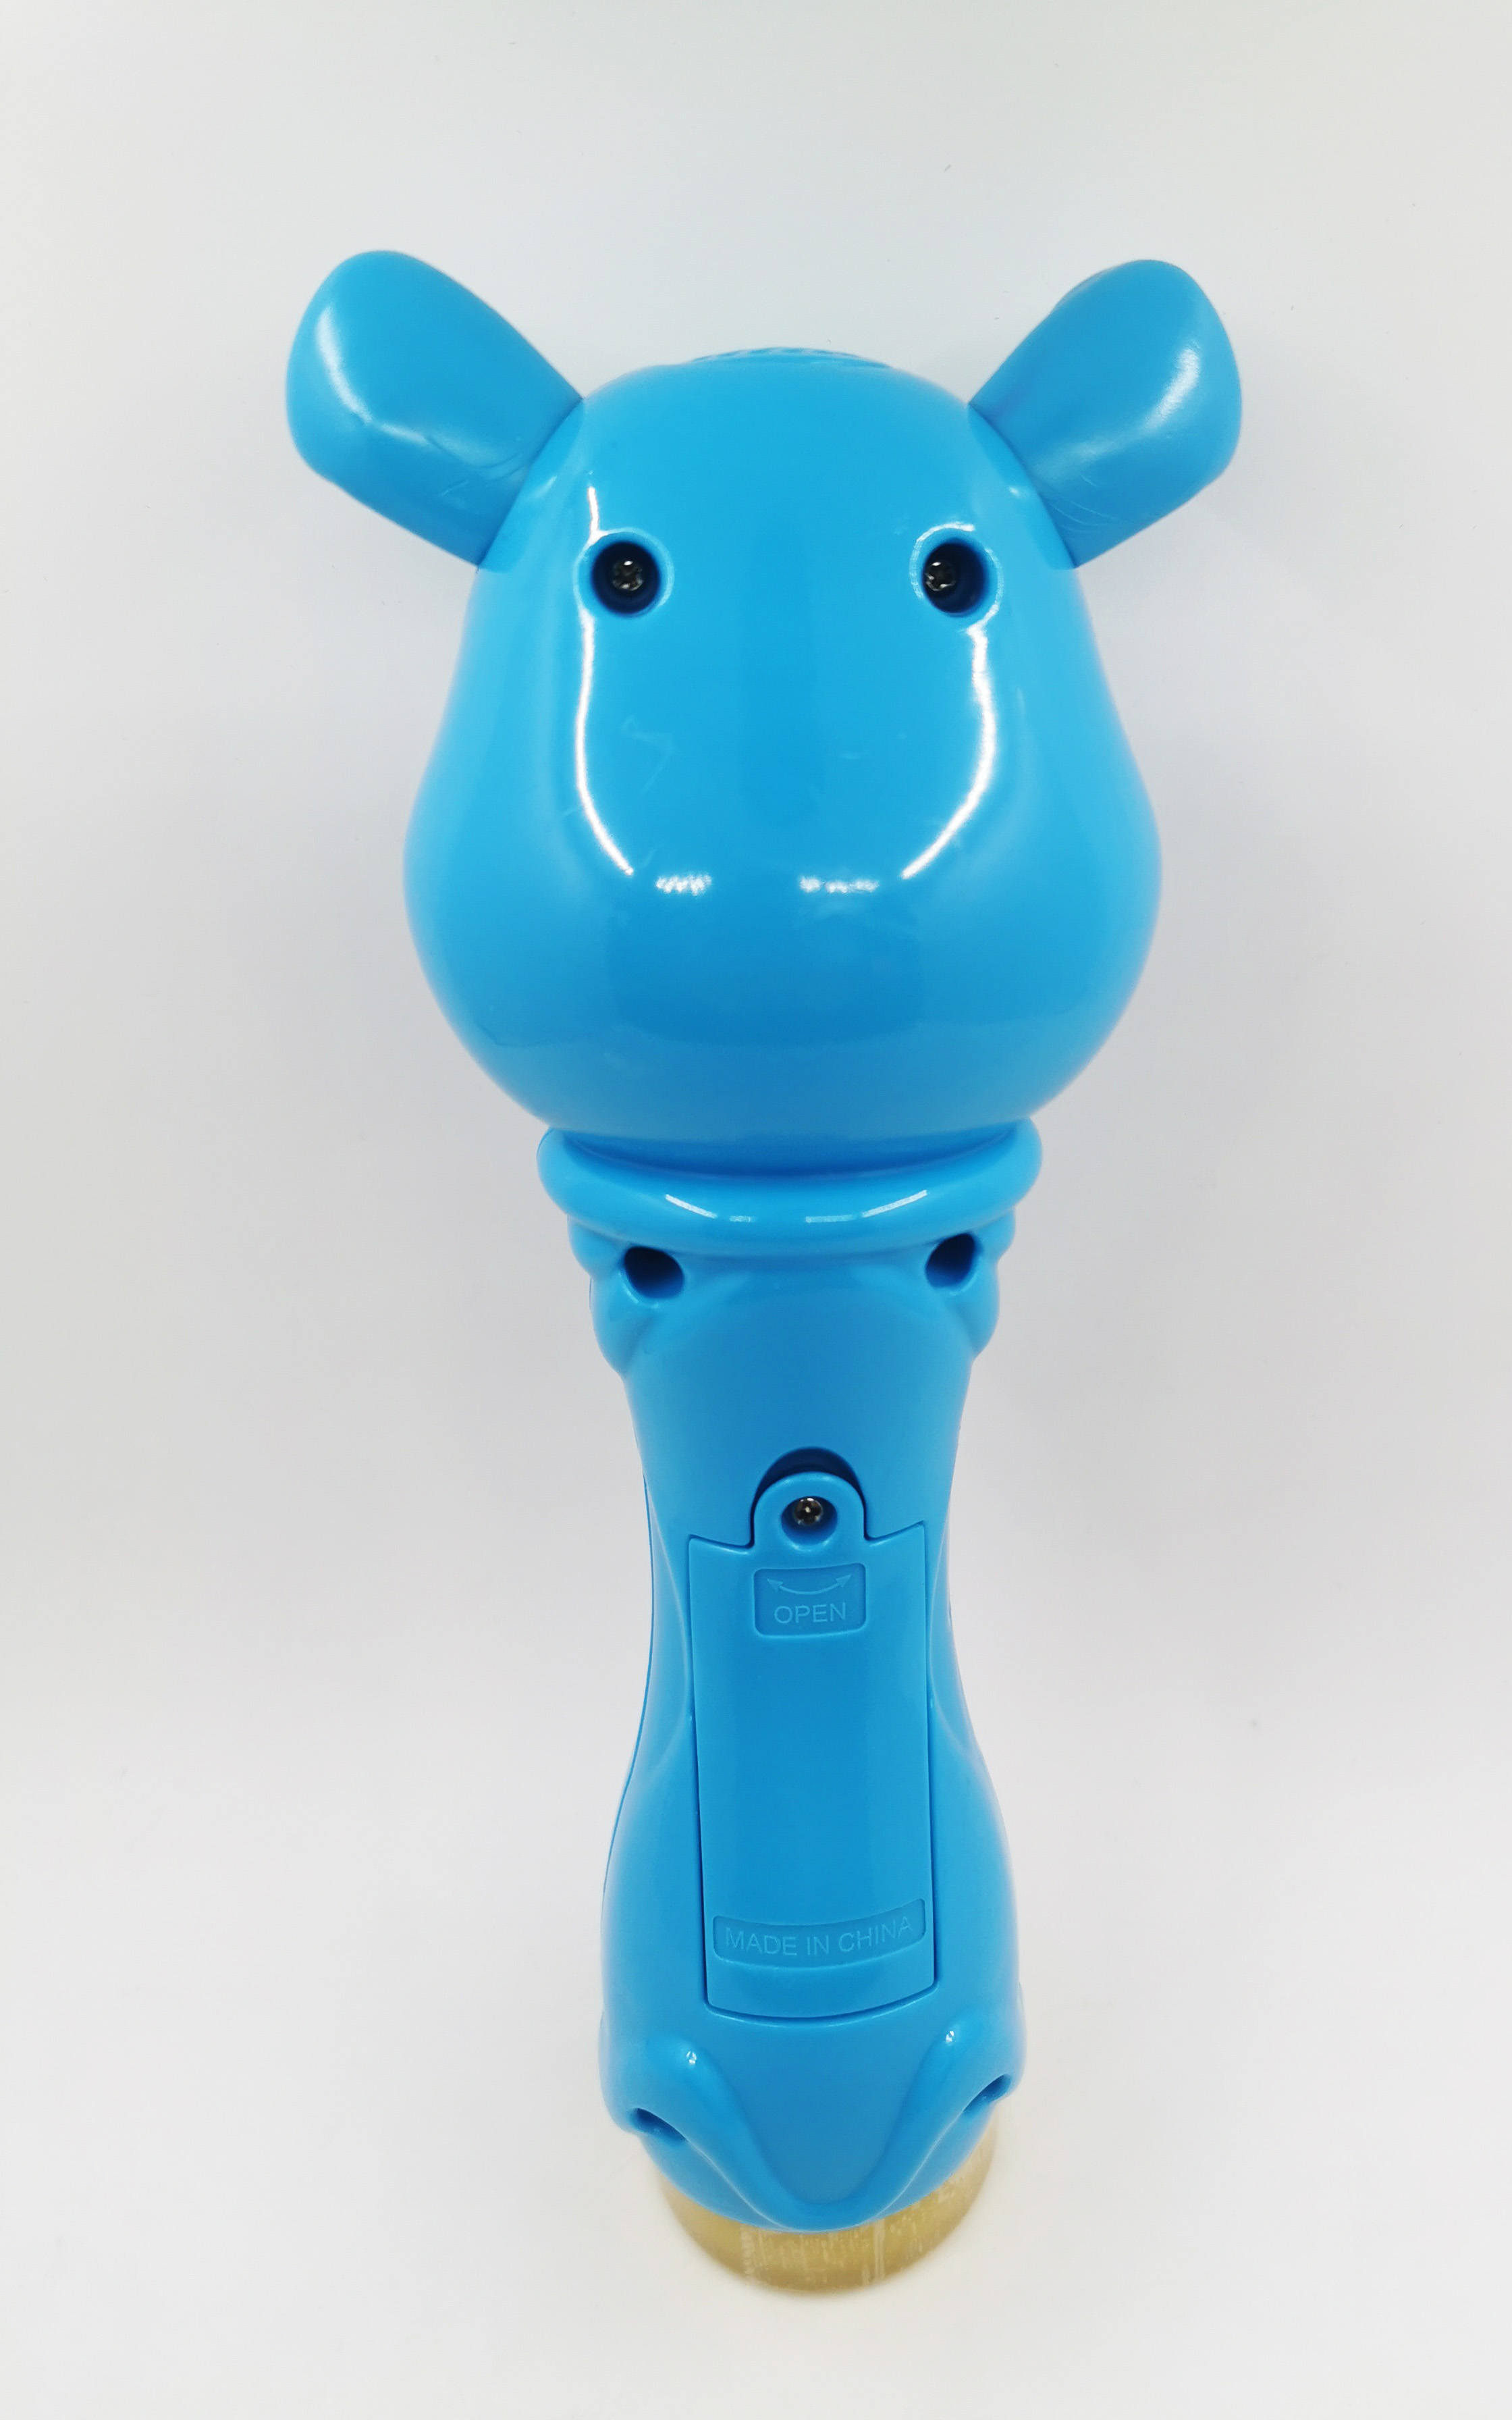 Spark Create Imagine Sing Along Dog Microphone for Kids, Cognitive Development, Ages 3 and Up, Blue - image 3 of 6